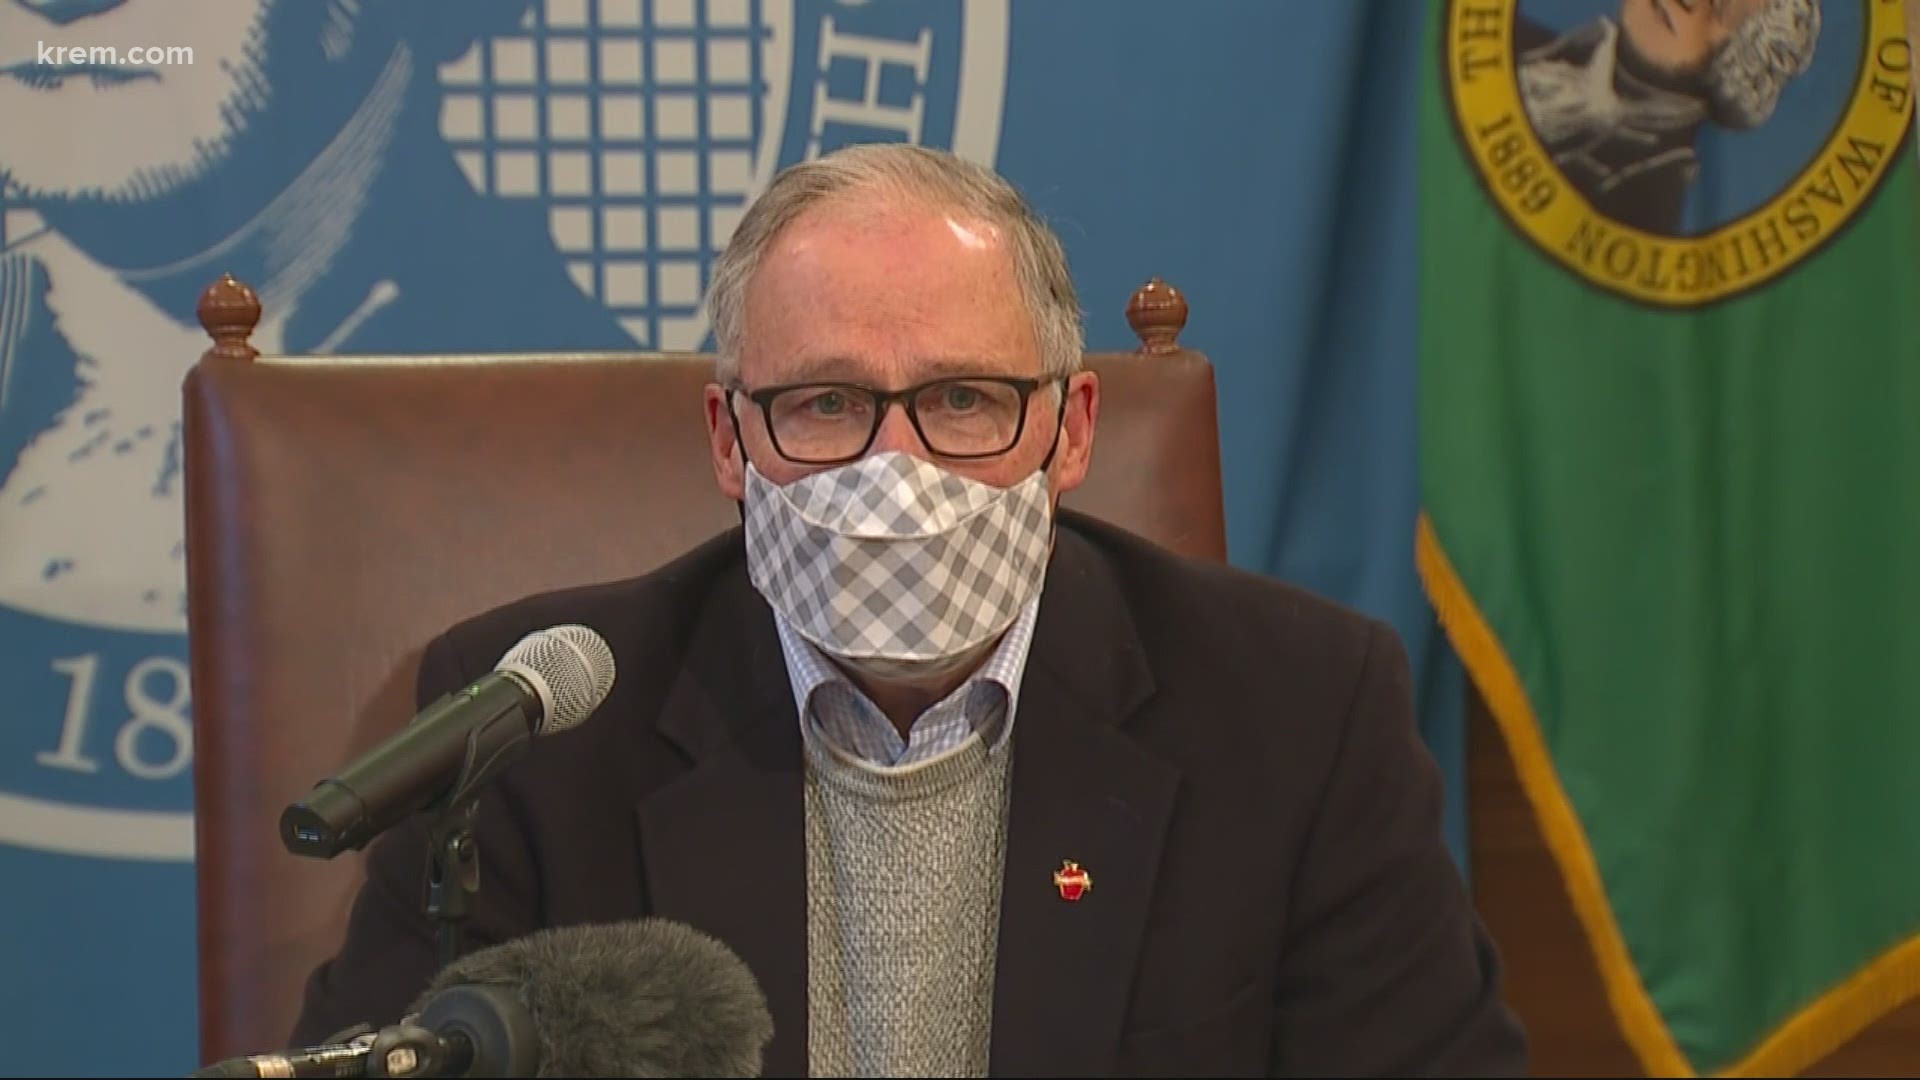 Governor Inslee announced there will no longer be the threat of being kicked back to phase one. But any idea of a phase three is still weeks out.